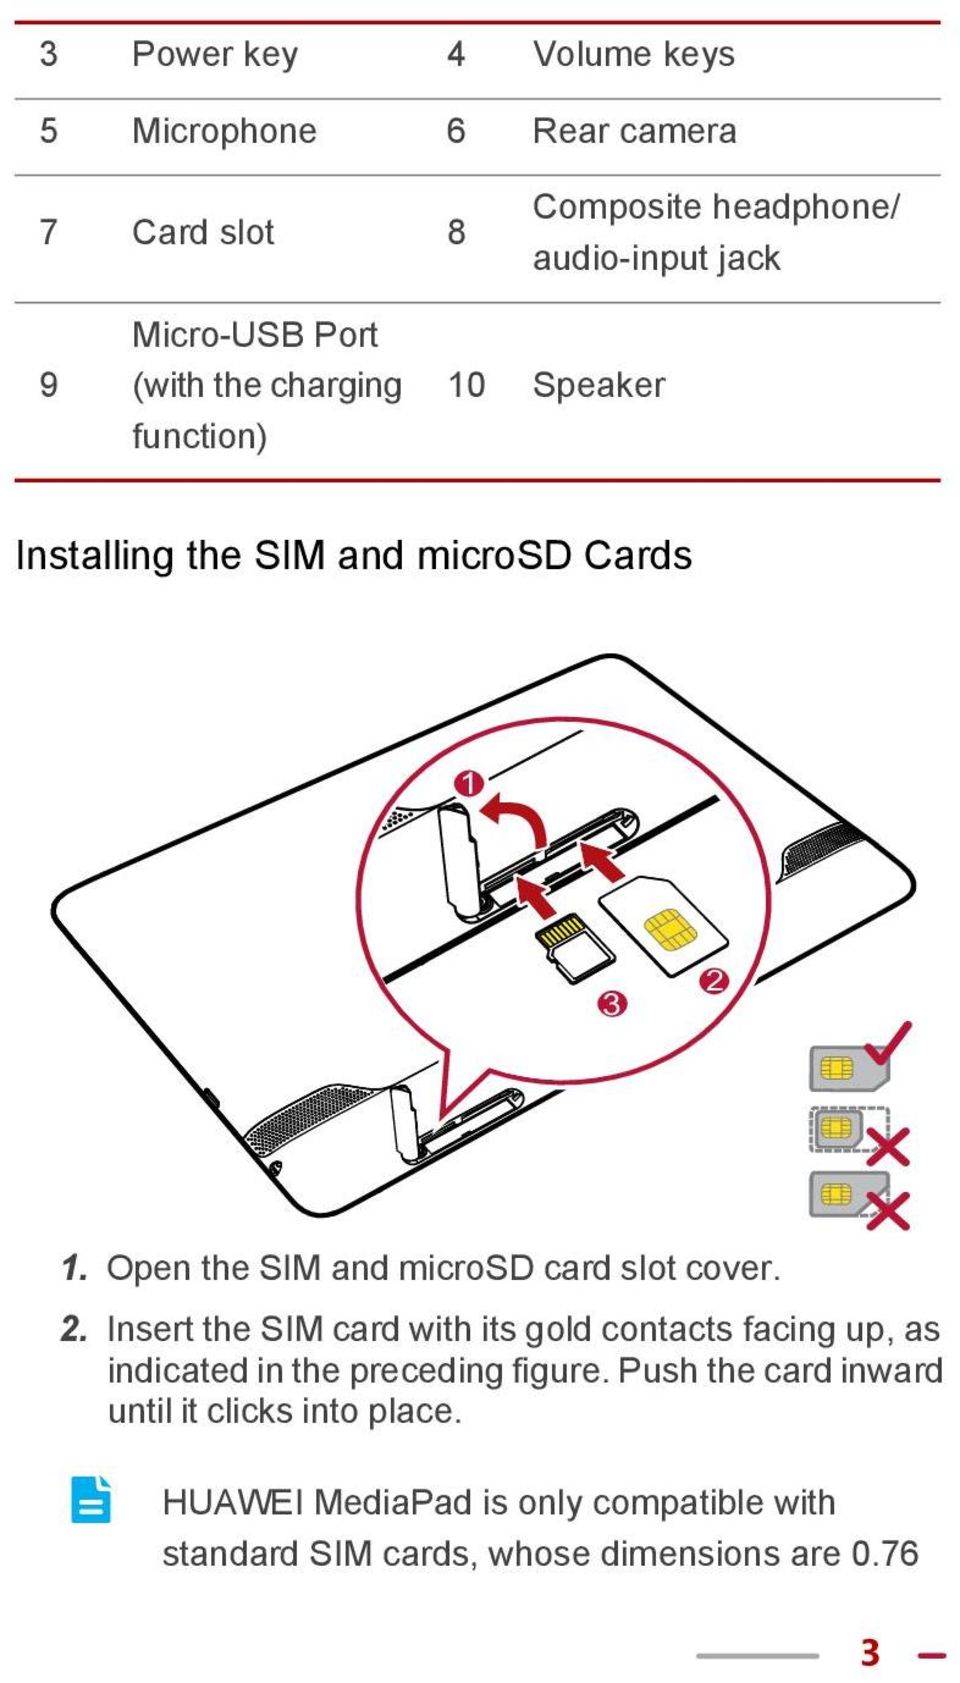 Open the SIM and microsd card slot cover. 2.